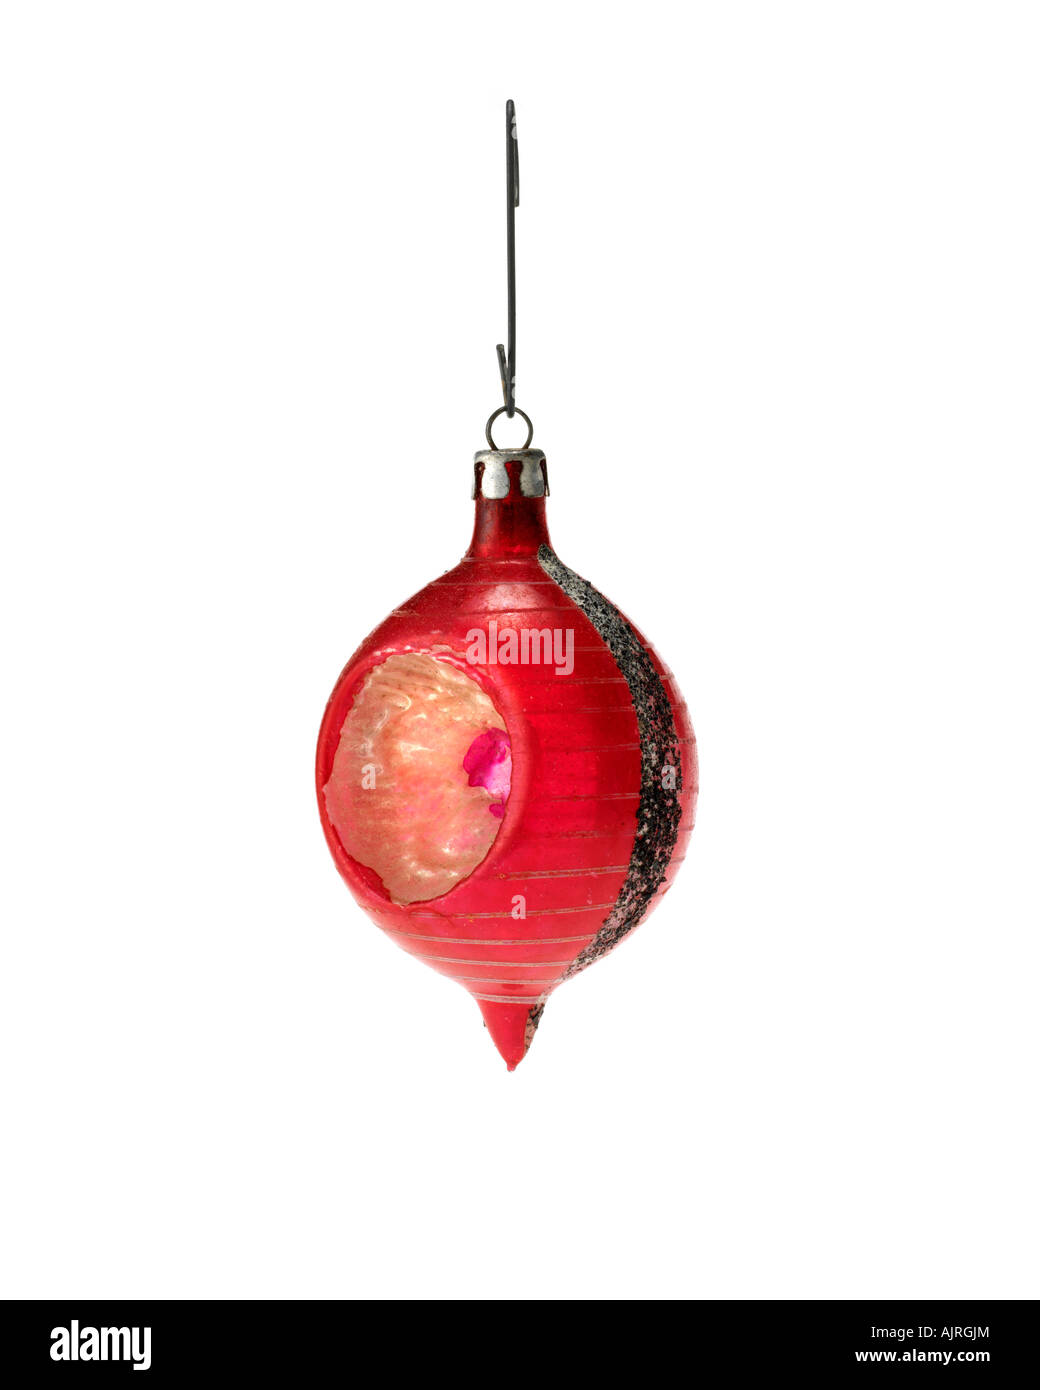 Christmas ornament hanging on hook Stock Photo